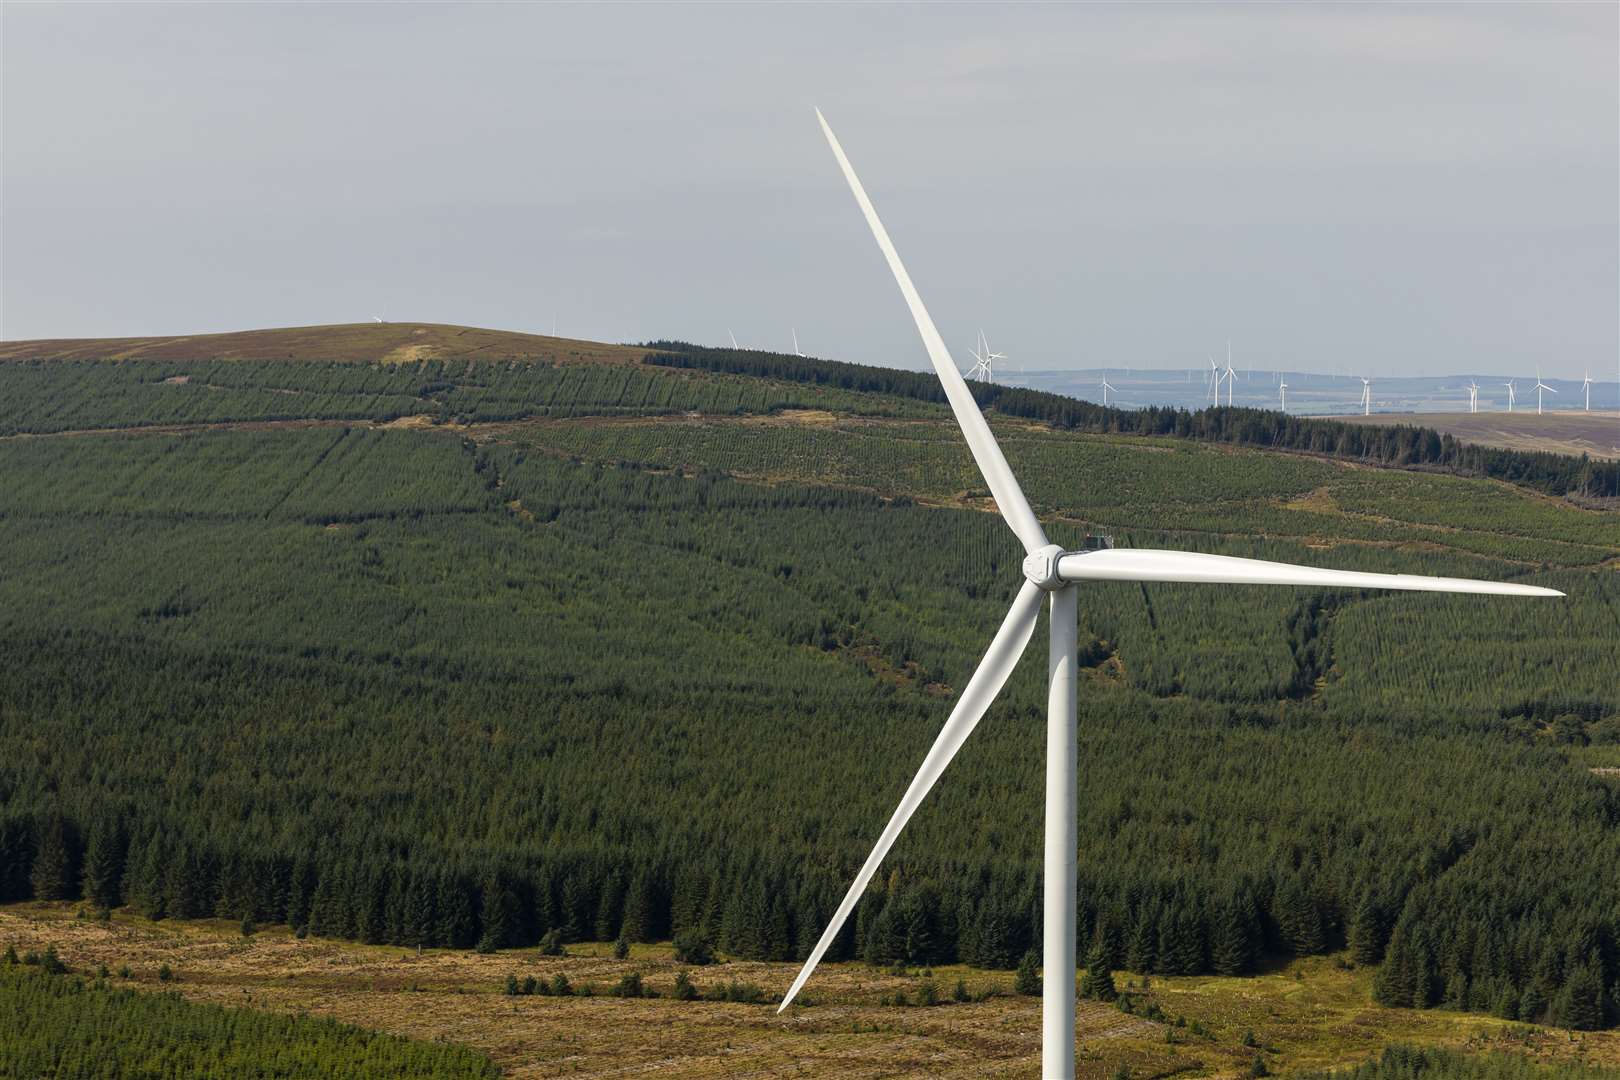 Is the environmental cost of wind farm construction too high?